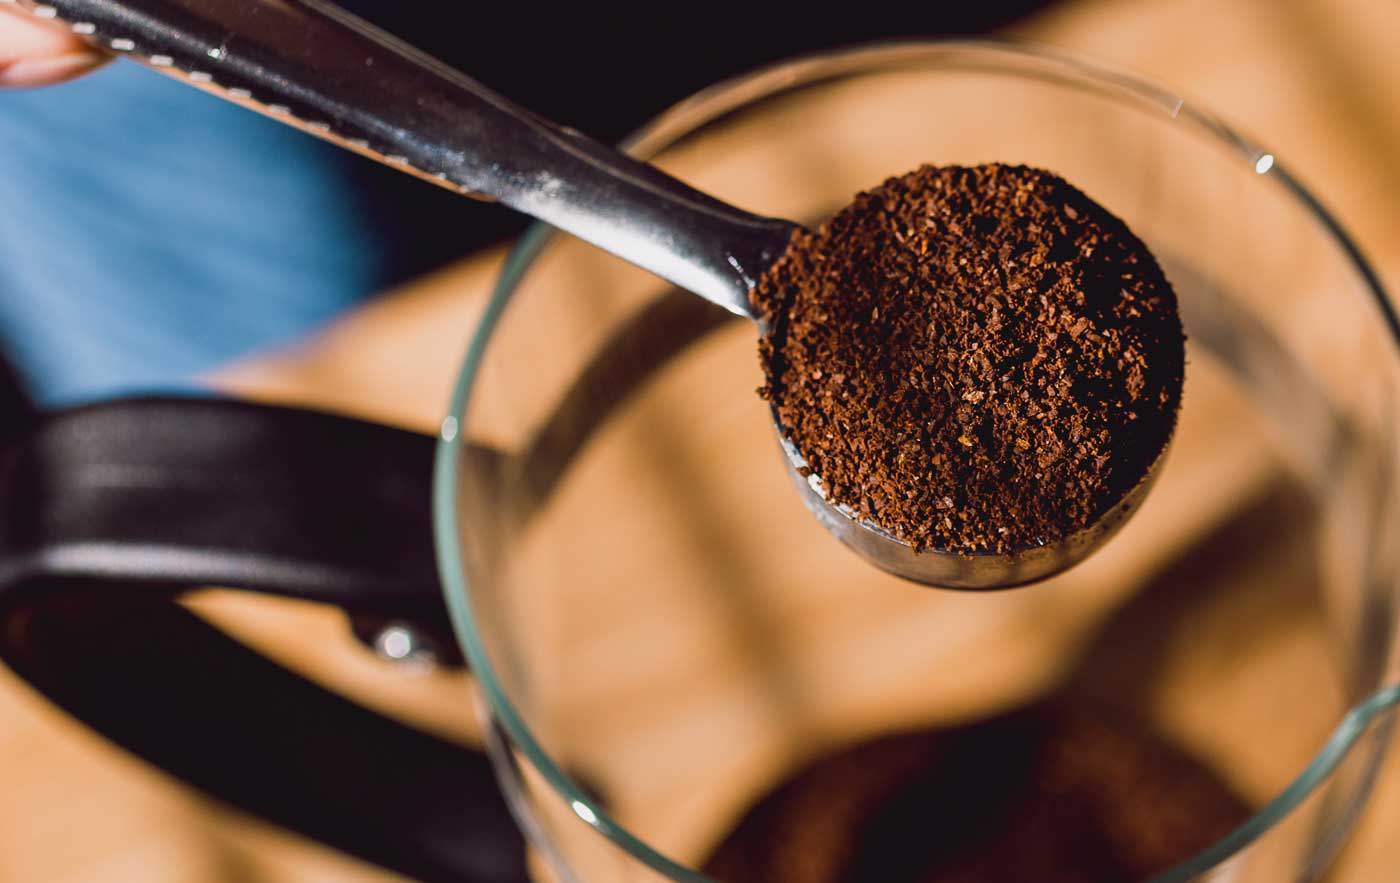 How much ground coffee should I use in a Cafetiere